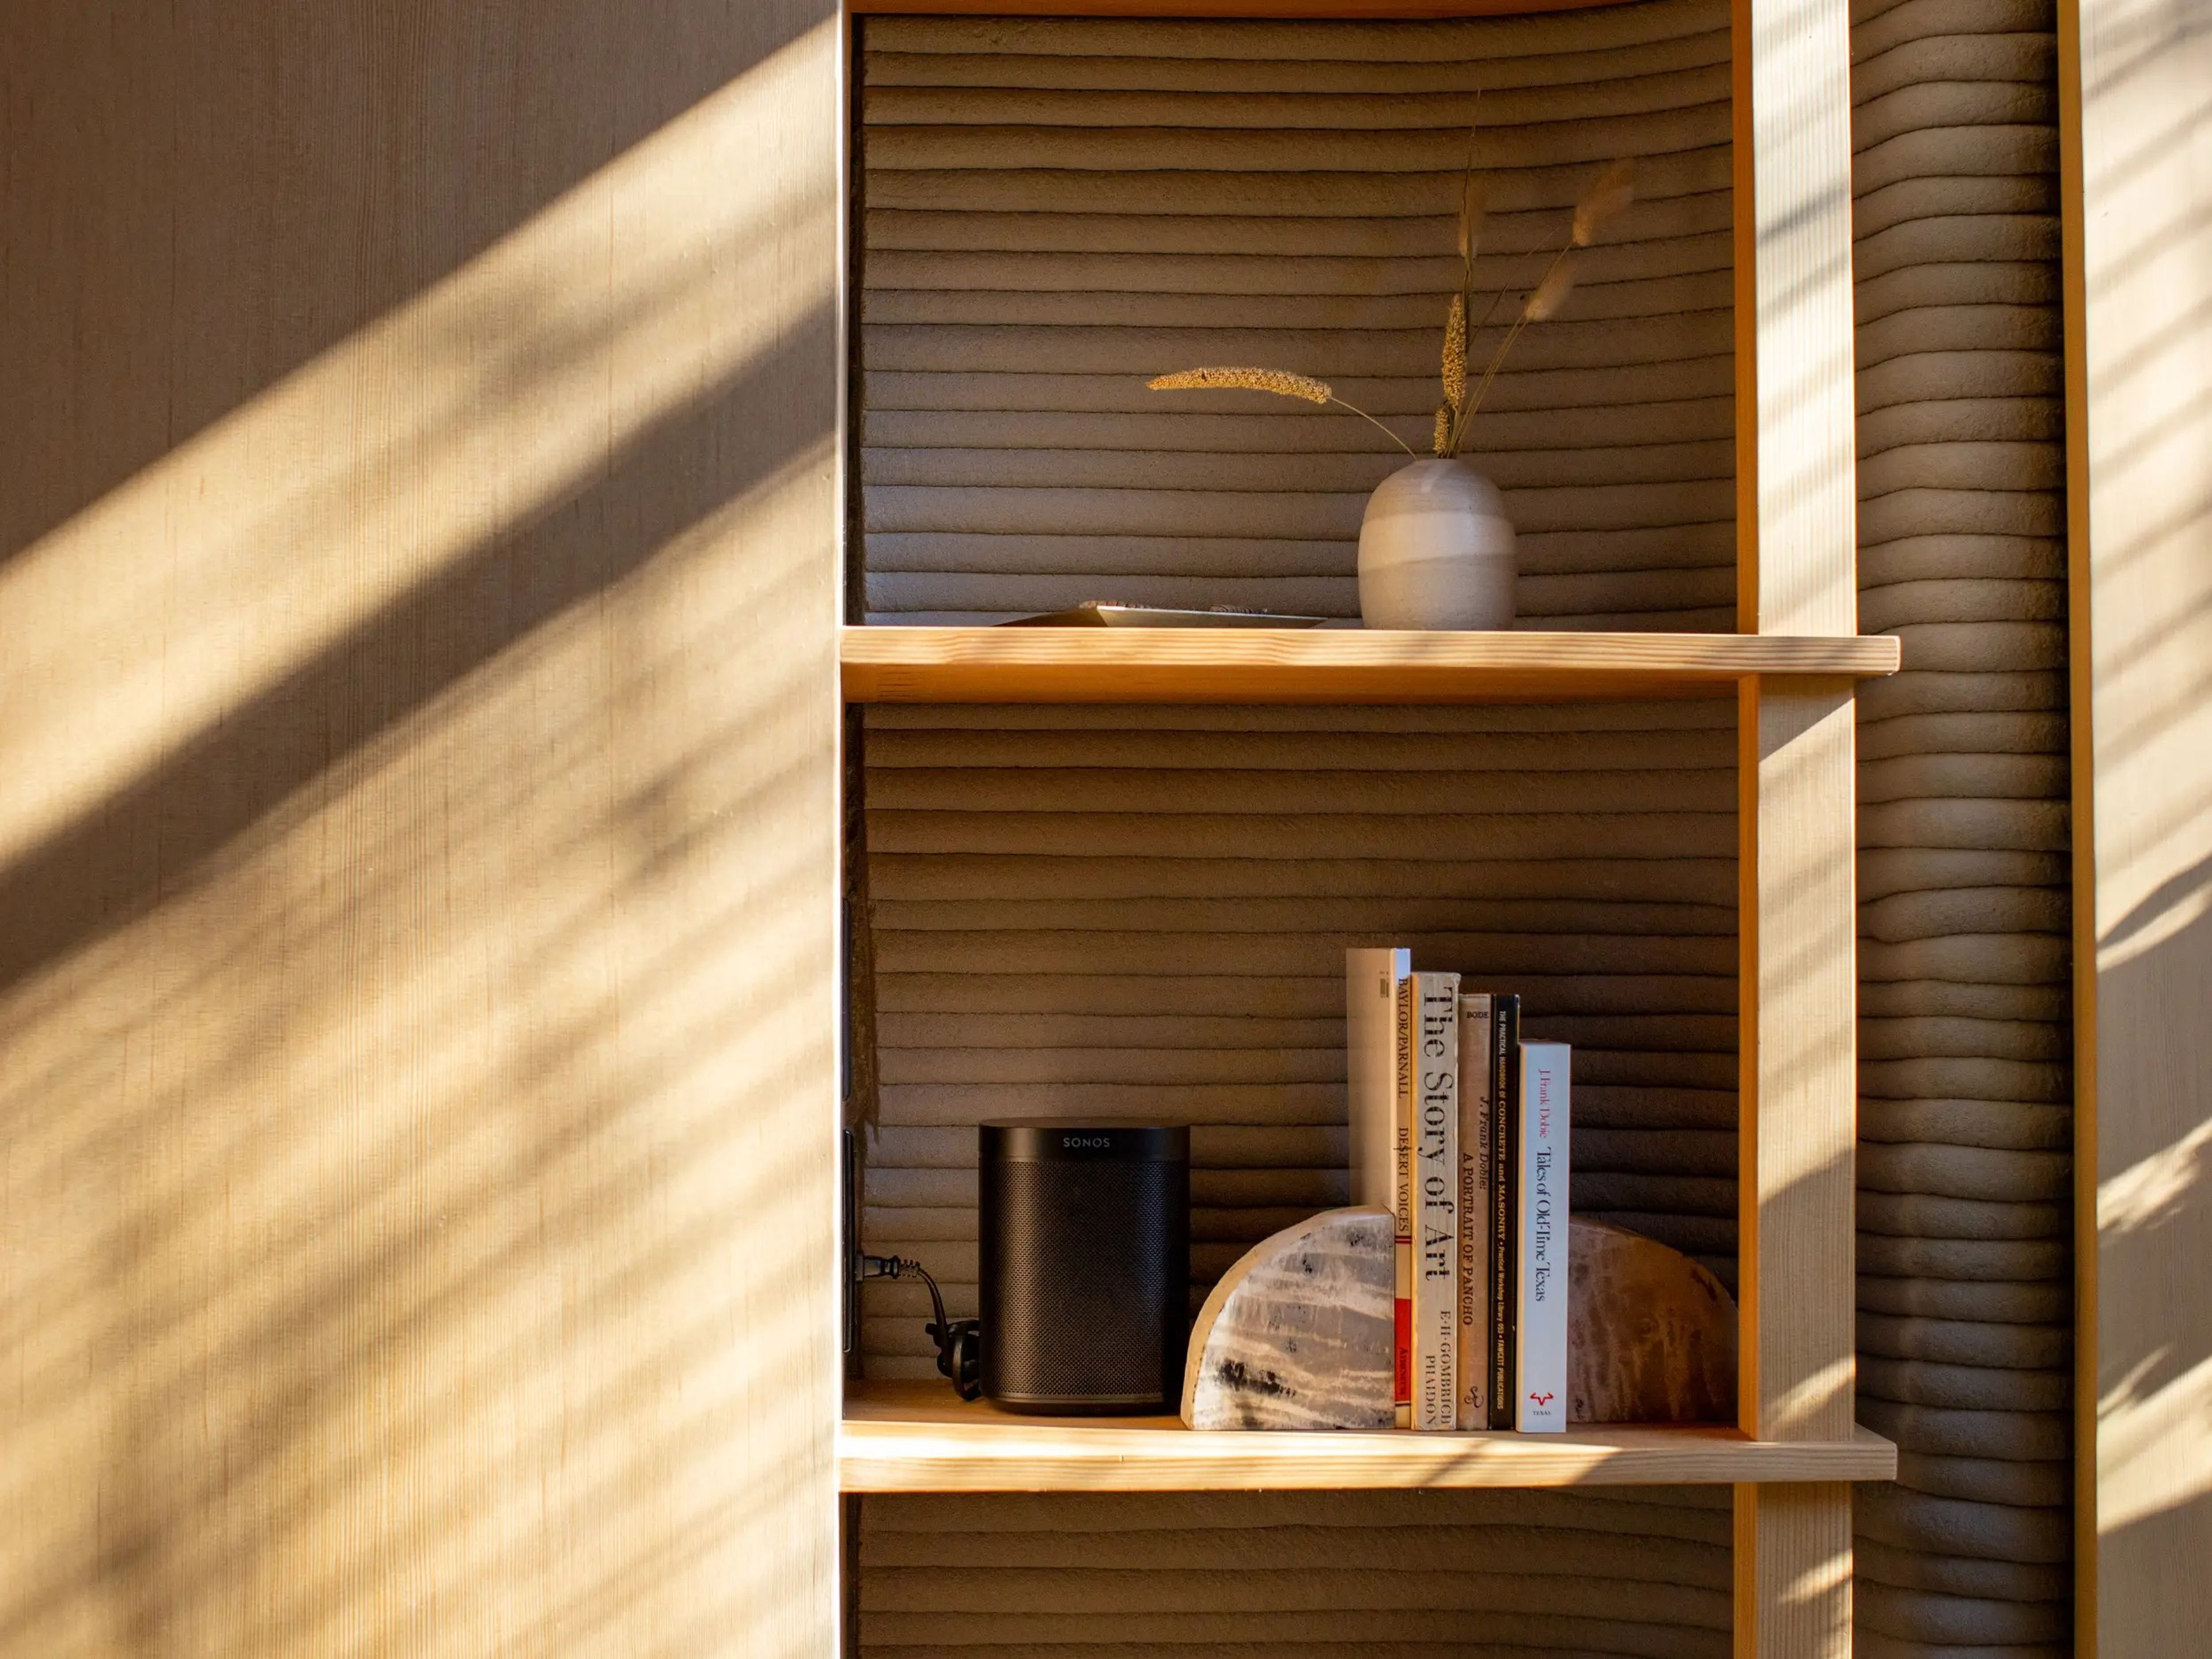 Light and shadows shining on a shelving storage.